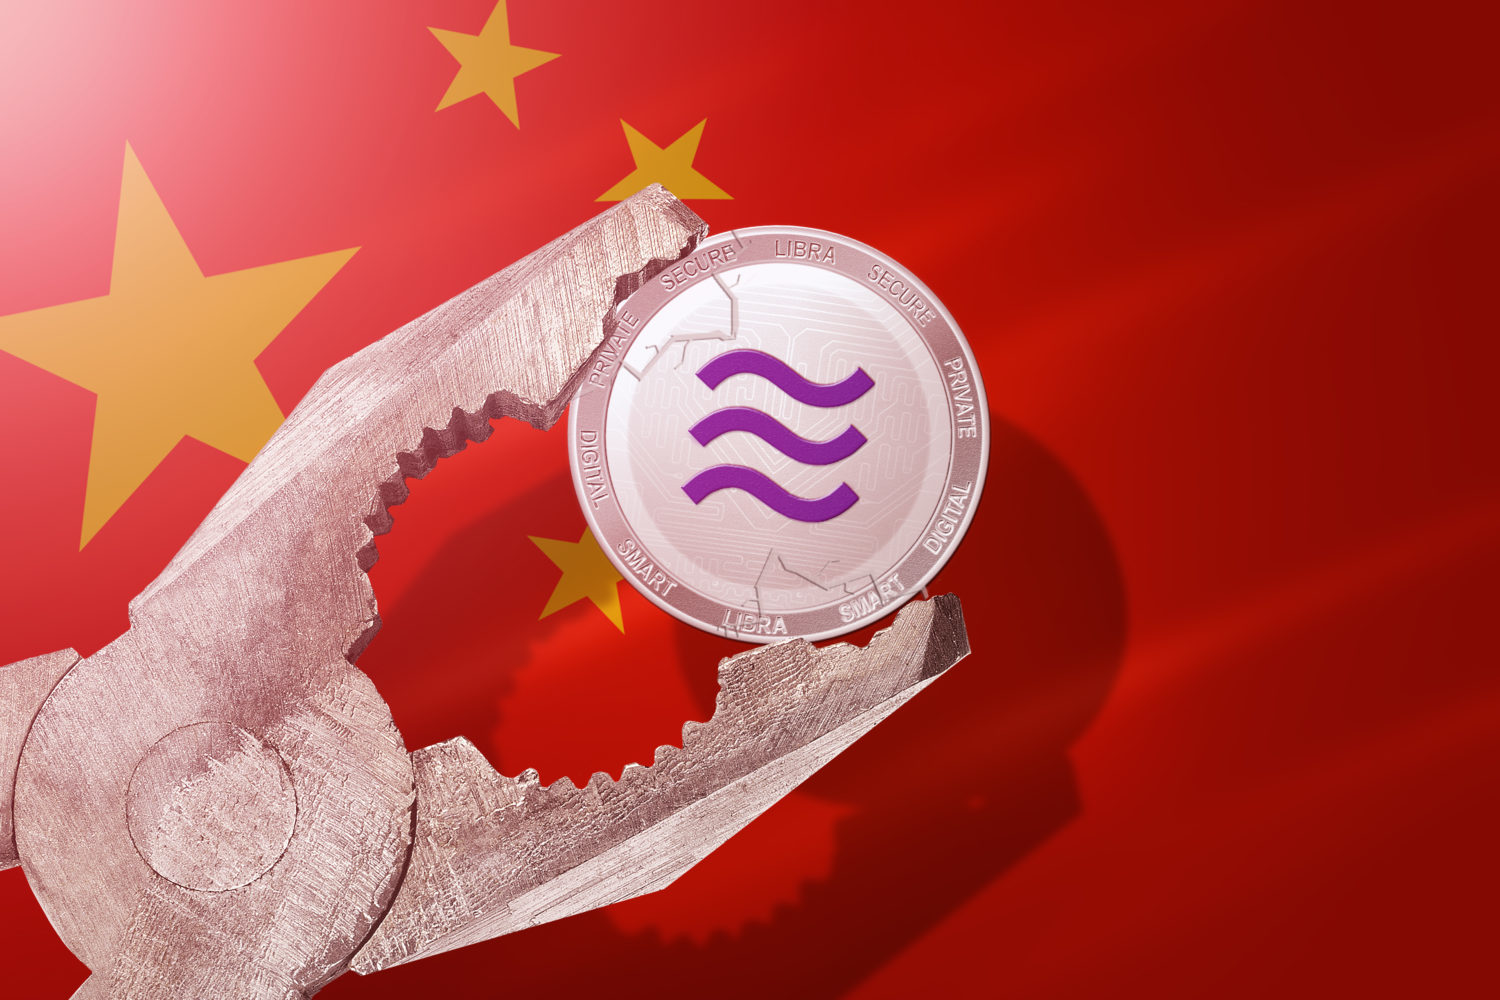 Ex-Official Trolls Libra, Says China Likely To Issue Digital Currency First